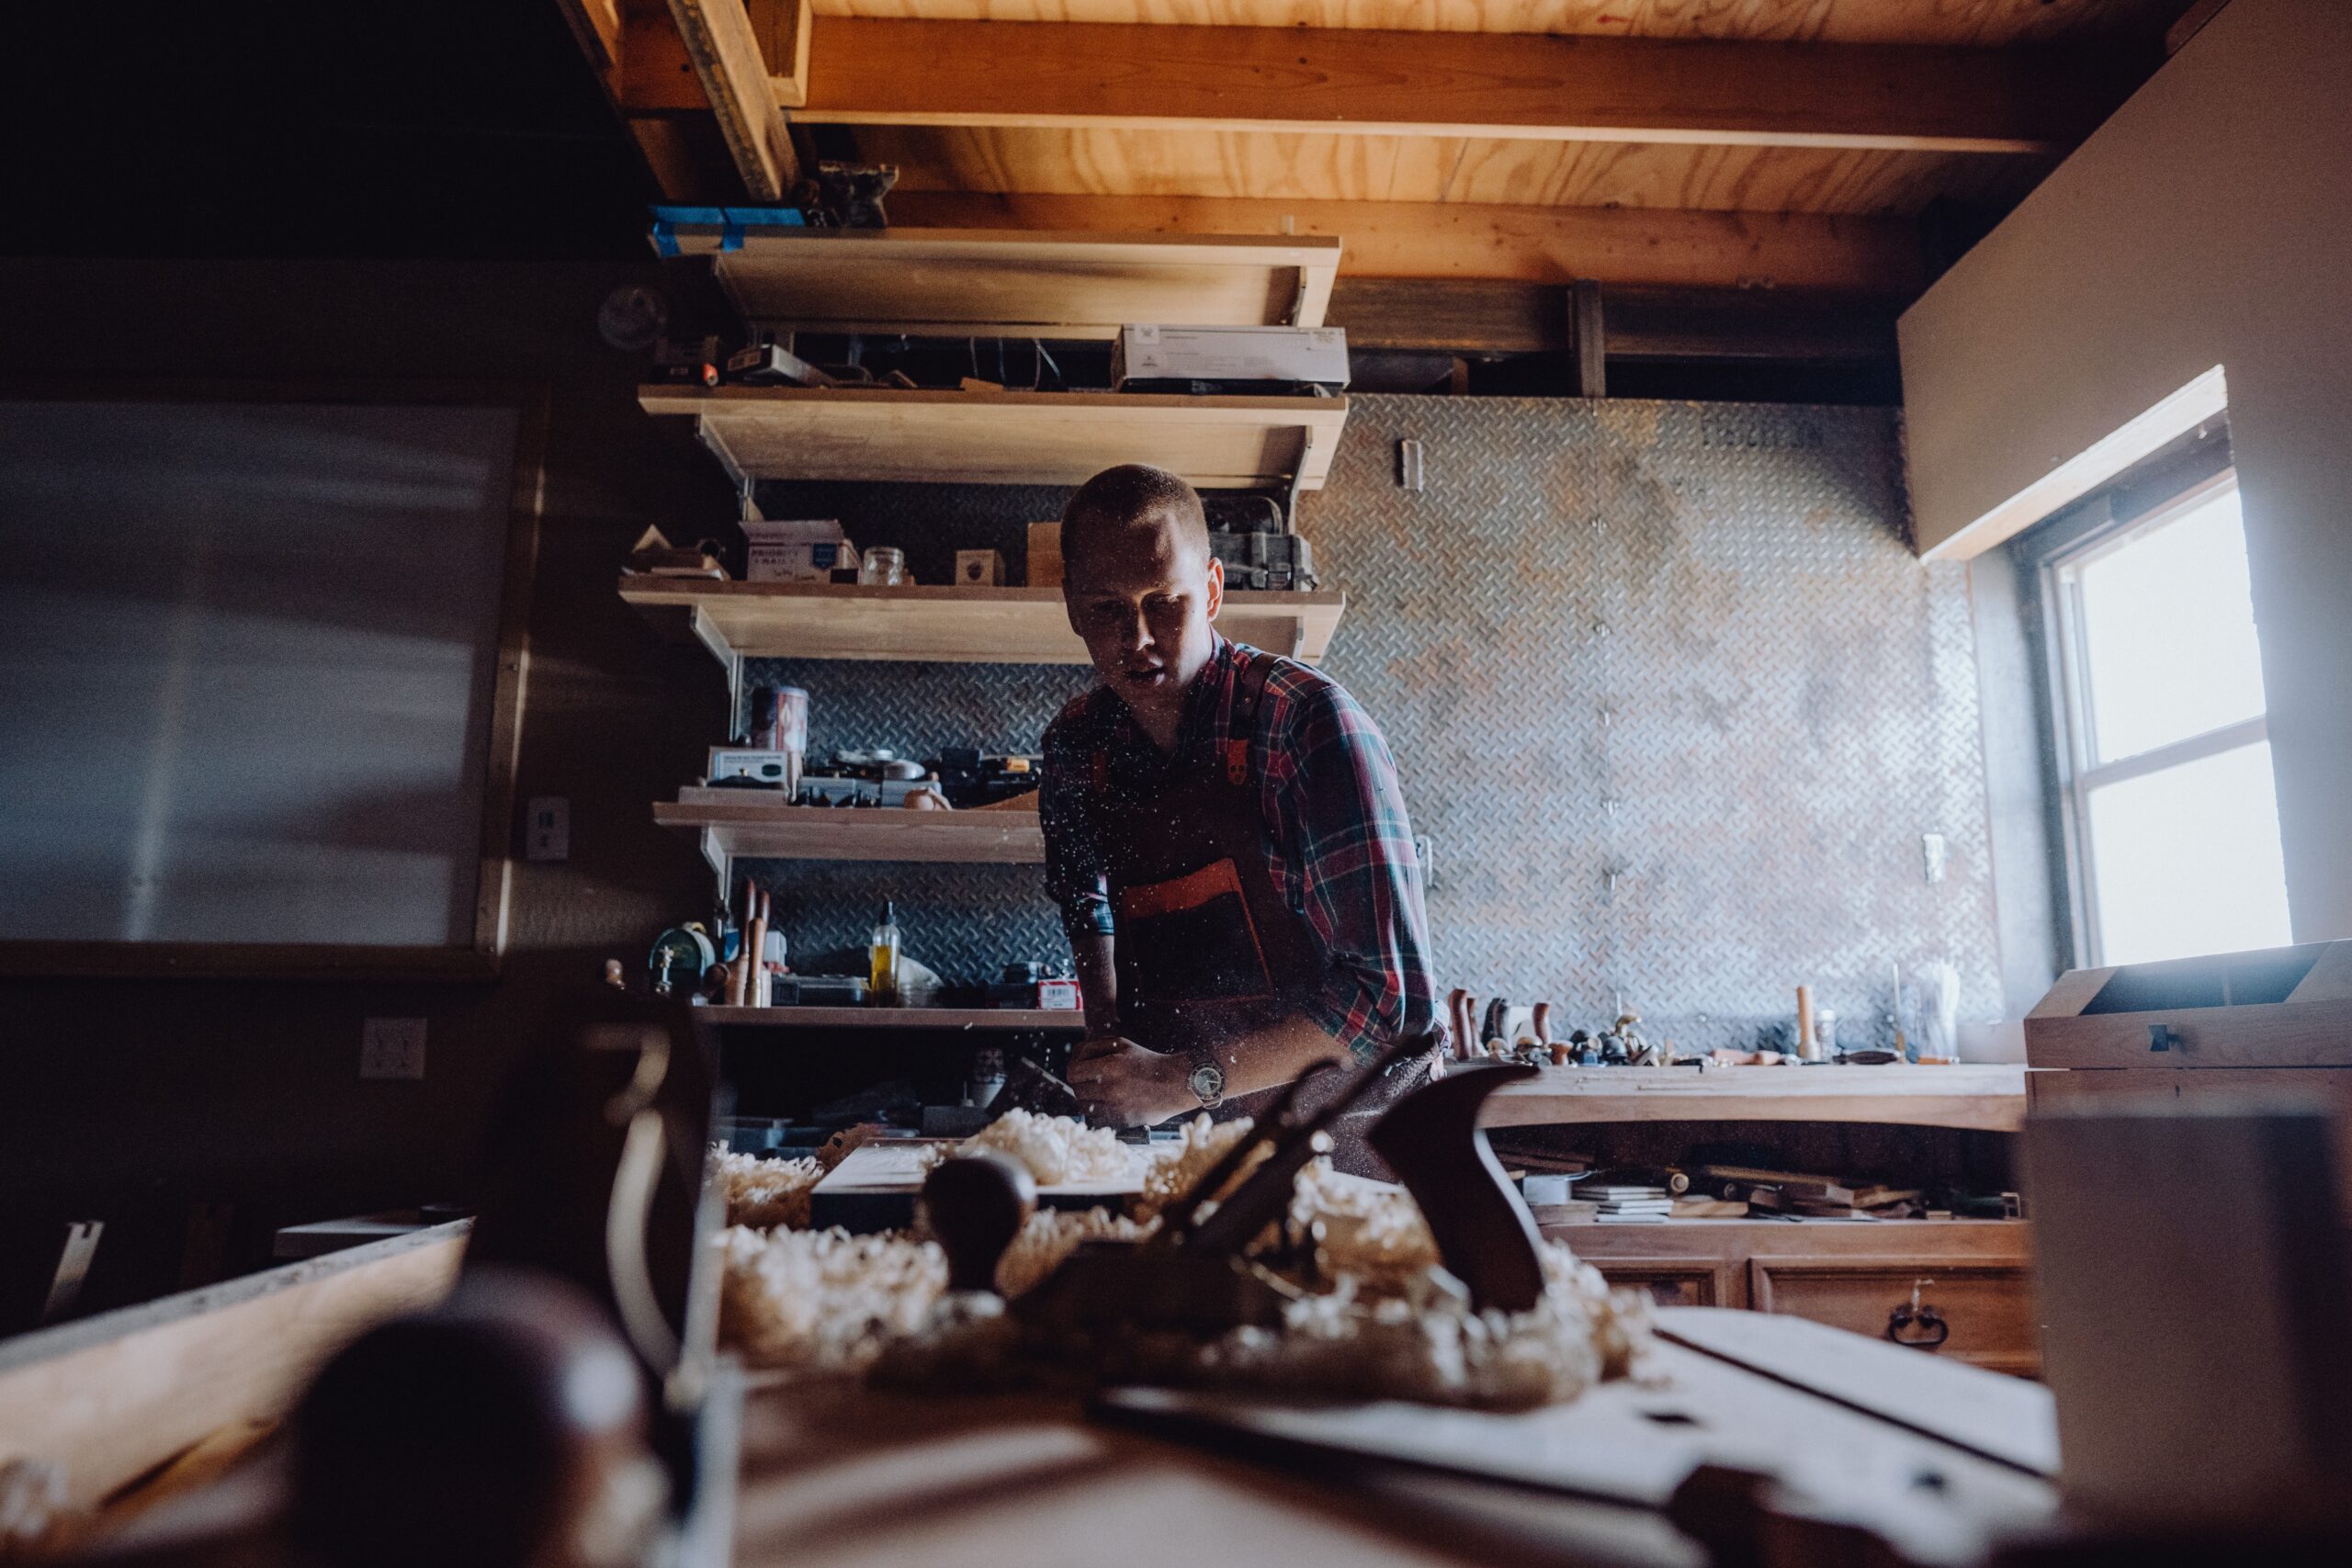 A person working in a woodworking shop